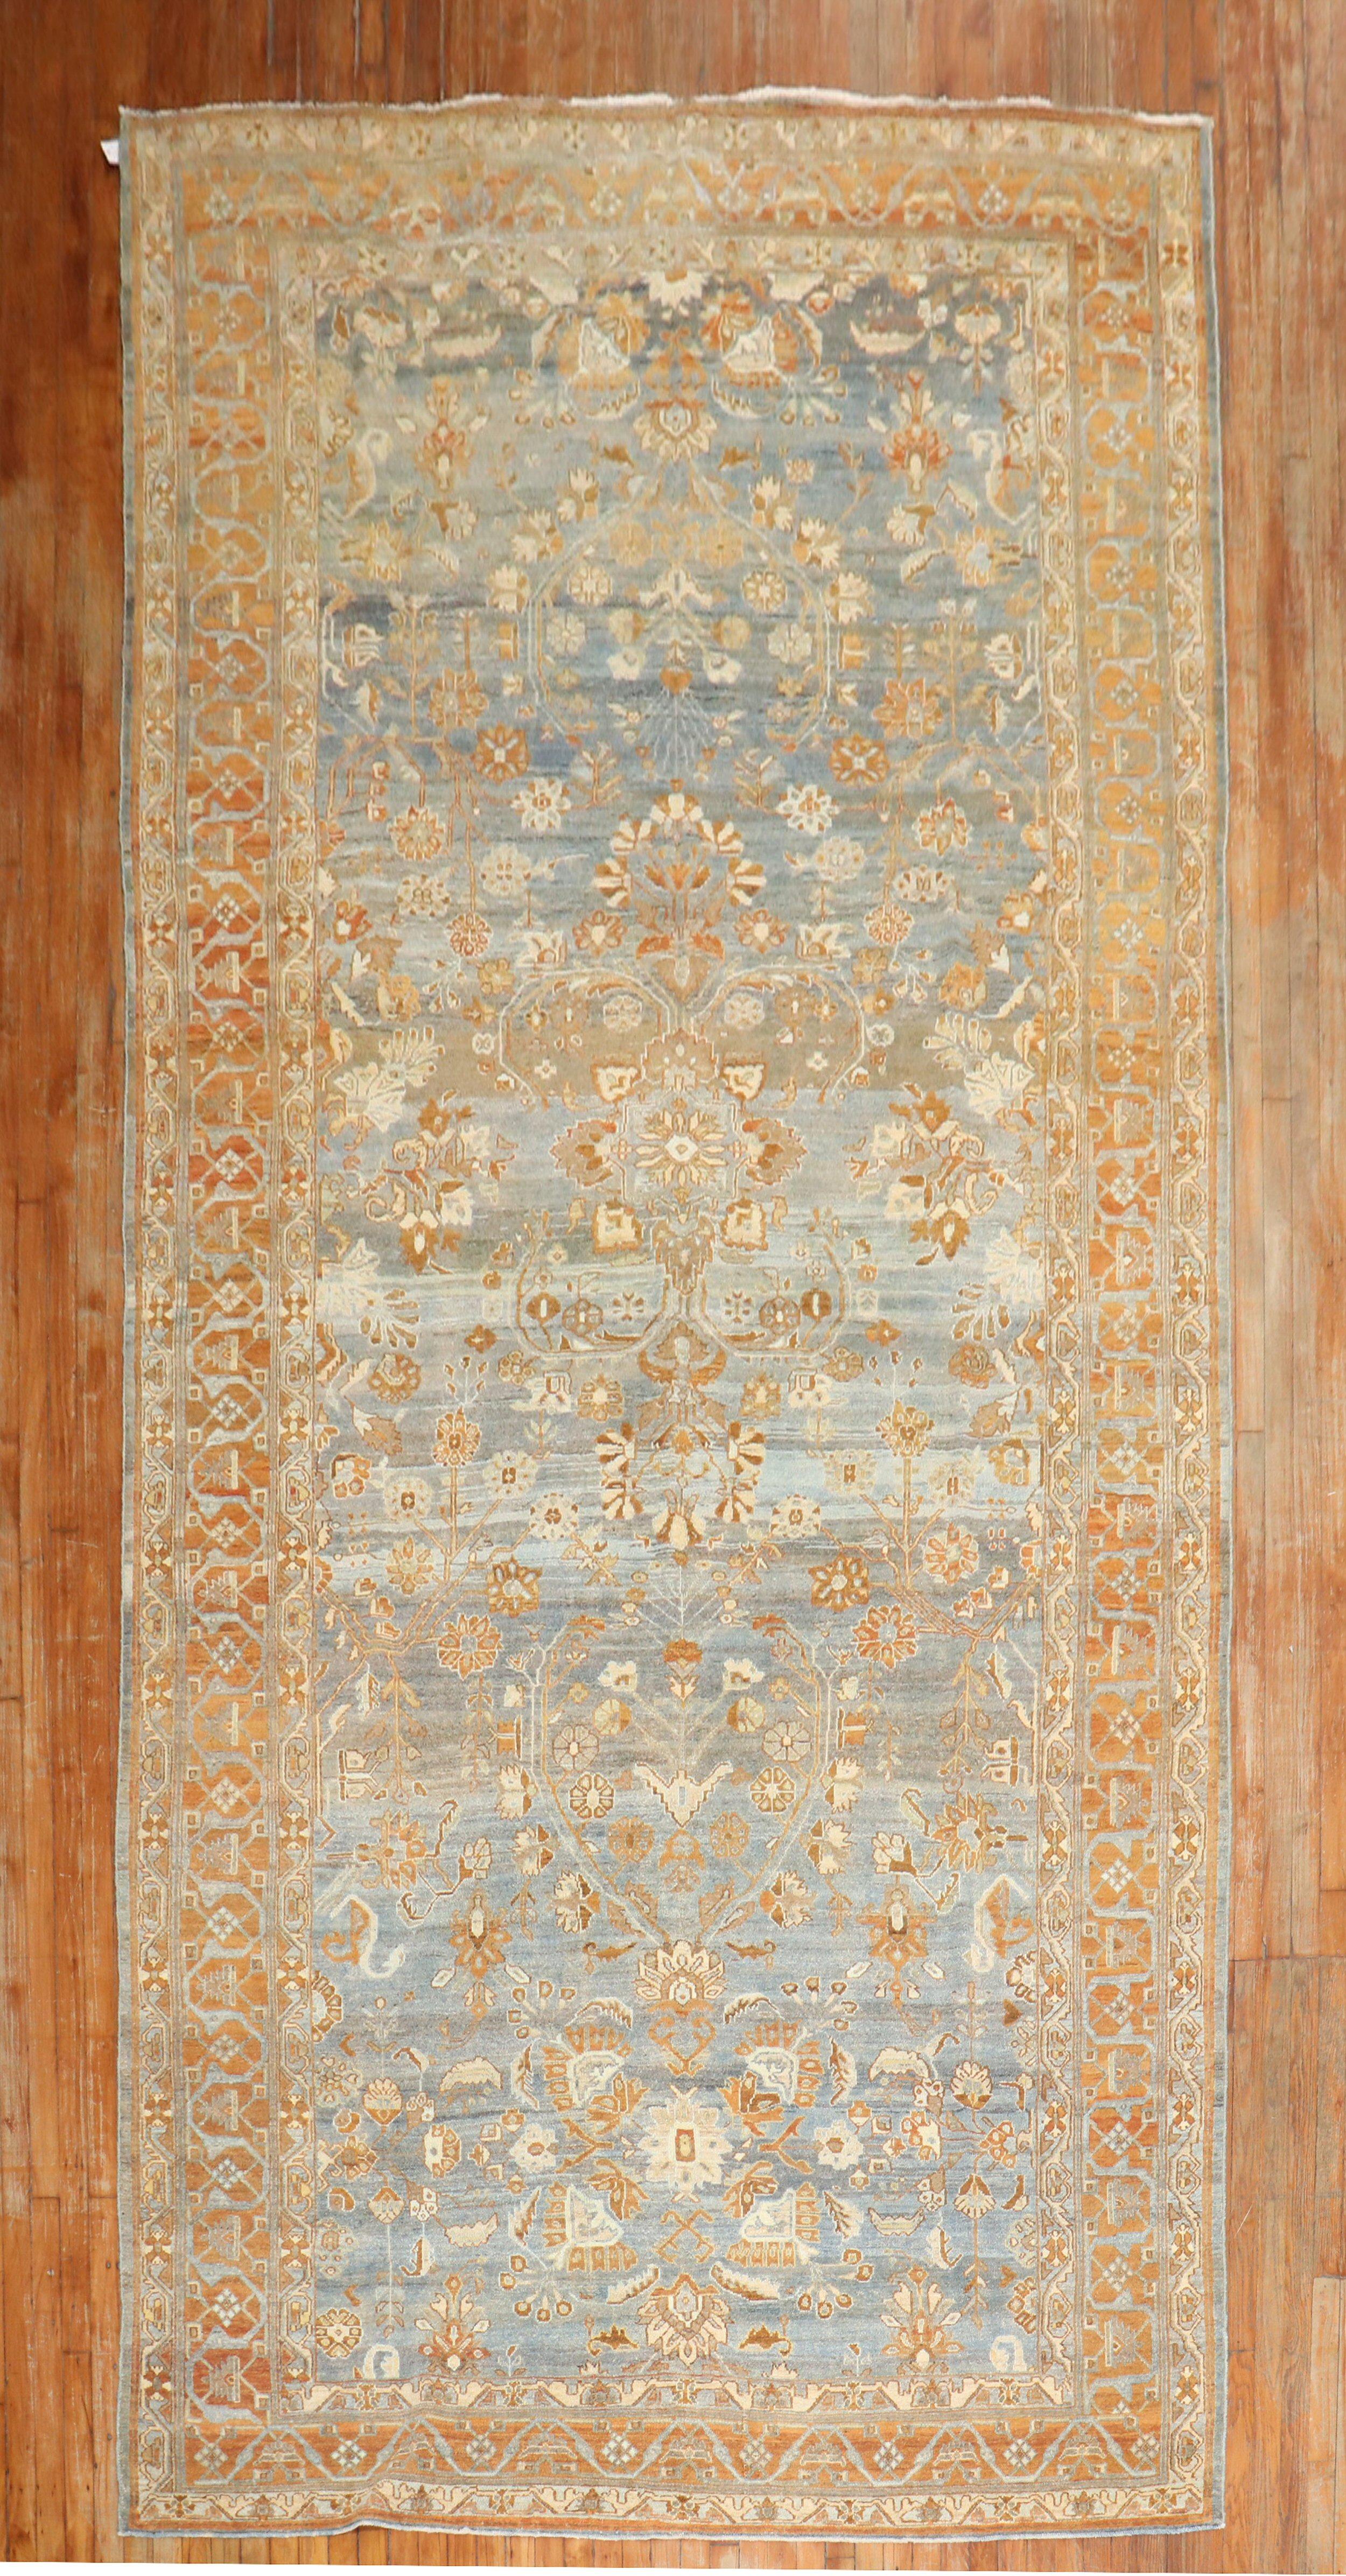 Early 20th century Persian Bibikabad rug with brown and apricot accents on a grayish-blue ground

Measures: 7'1'' x 16'

Bibikabad rugs come from the Hamadan village region of western Iran. Meaning 